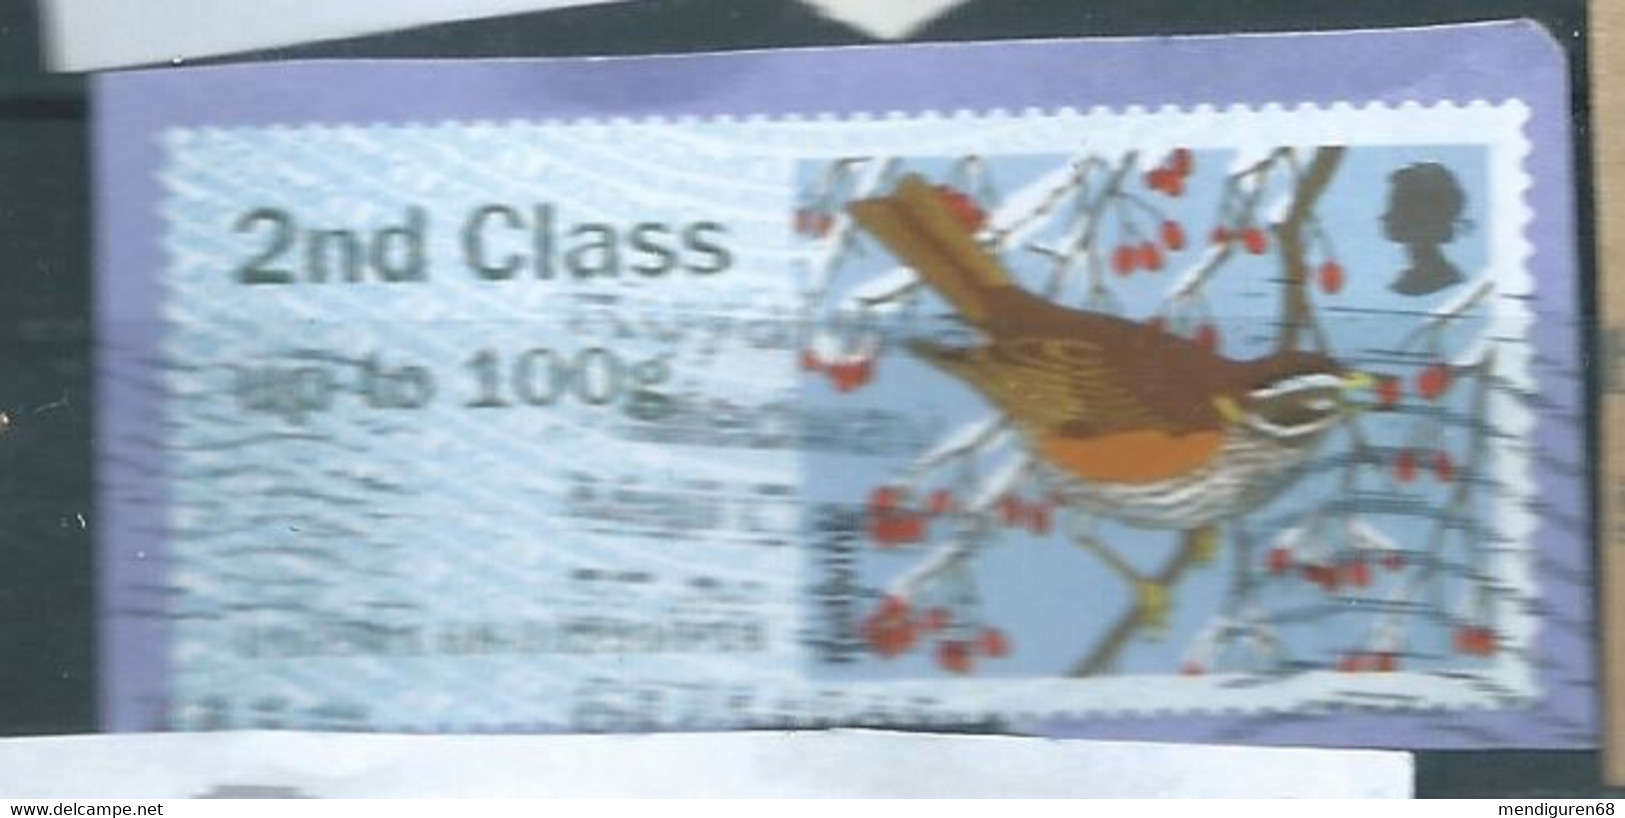 GROSBRITANNIEN GRANDE BRETAGNE GB POST&GO 2015 WINTER FUR AND FEATHERS:REDWING 2Nd CLASS Up To 100g PAPER SG FS144 - Post & Go Stamps